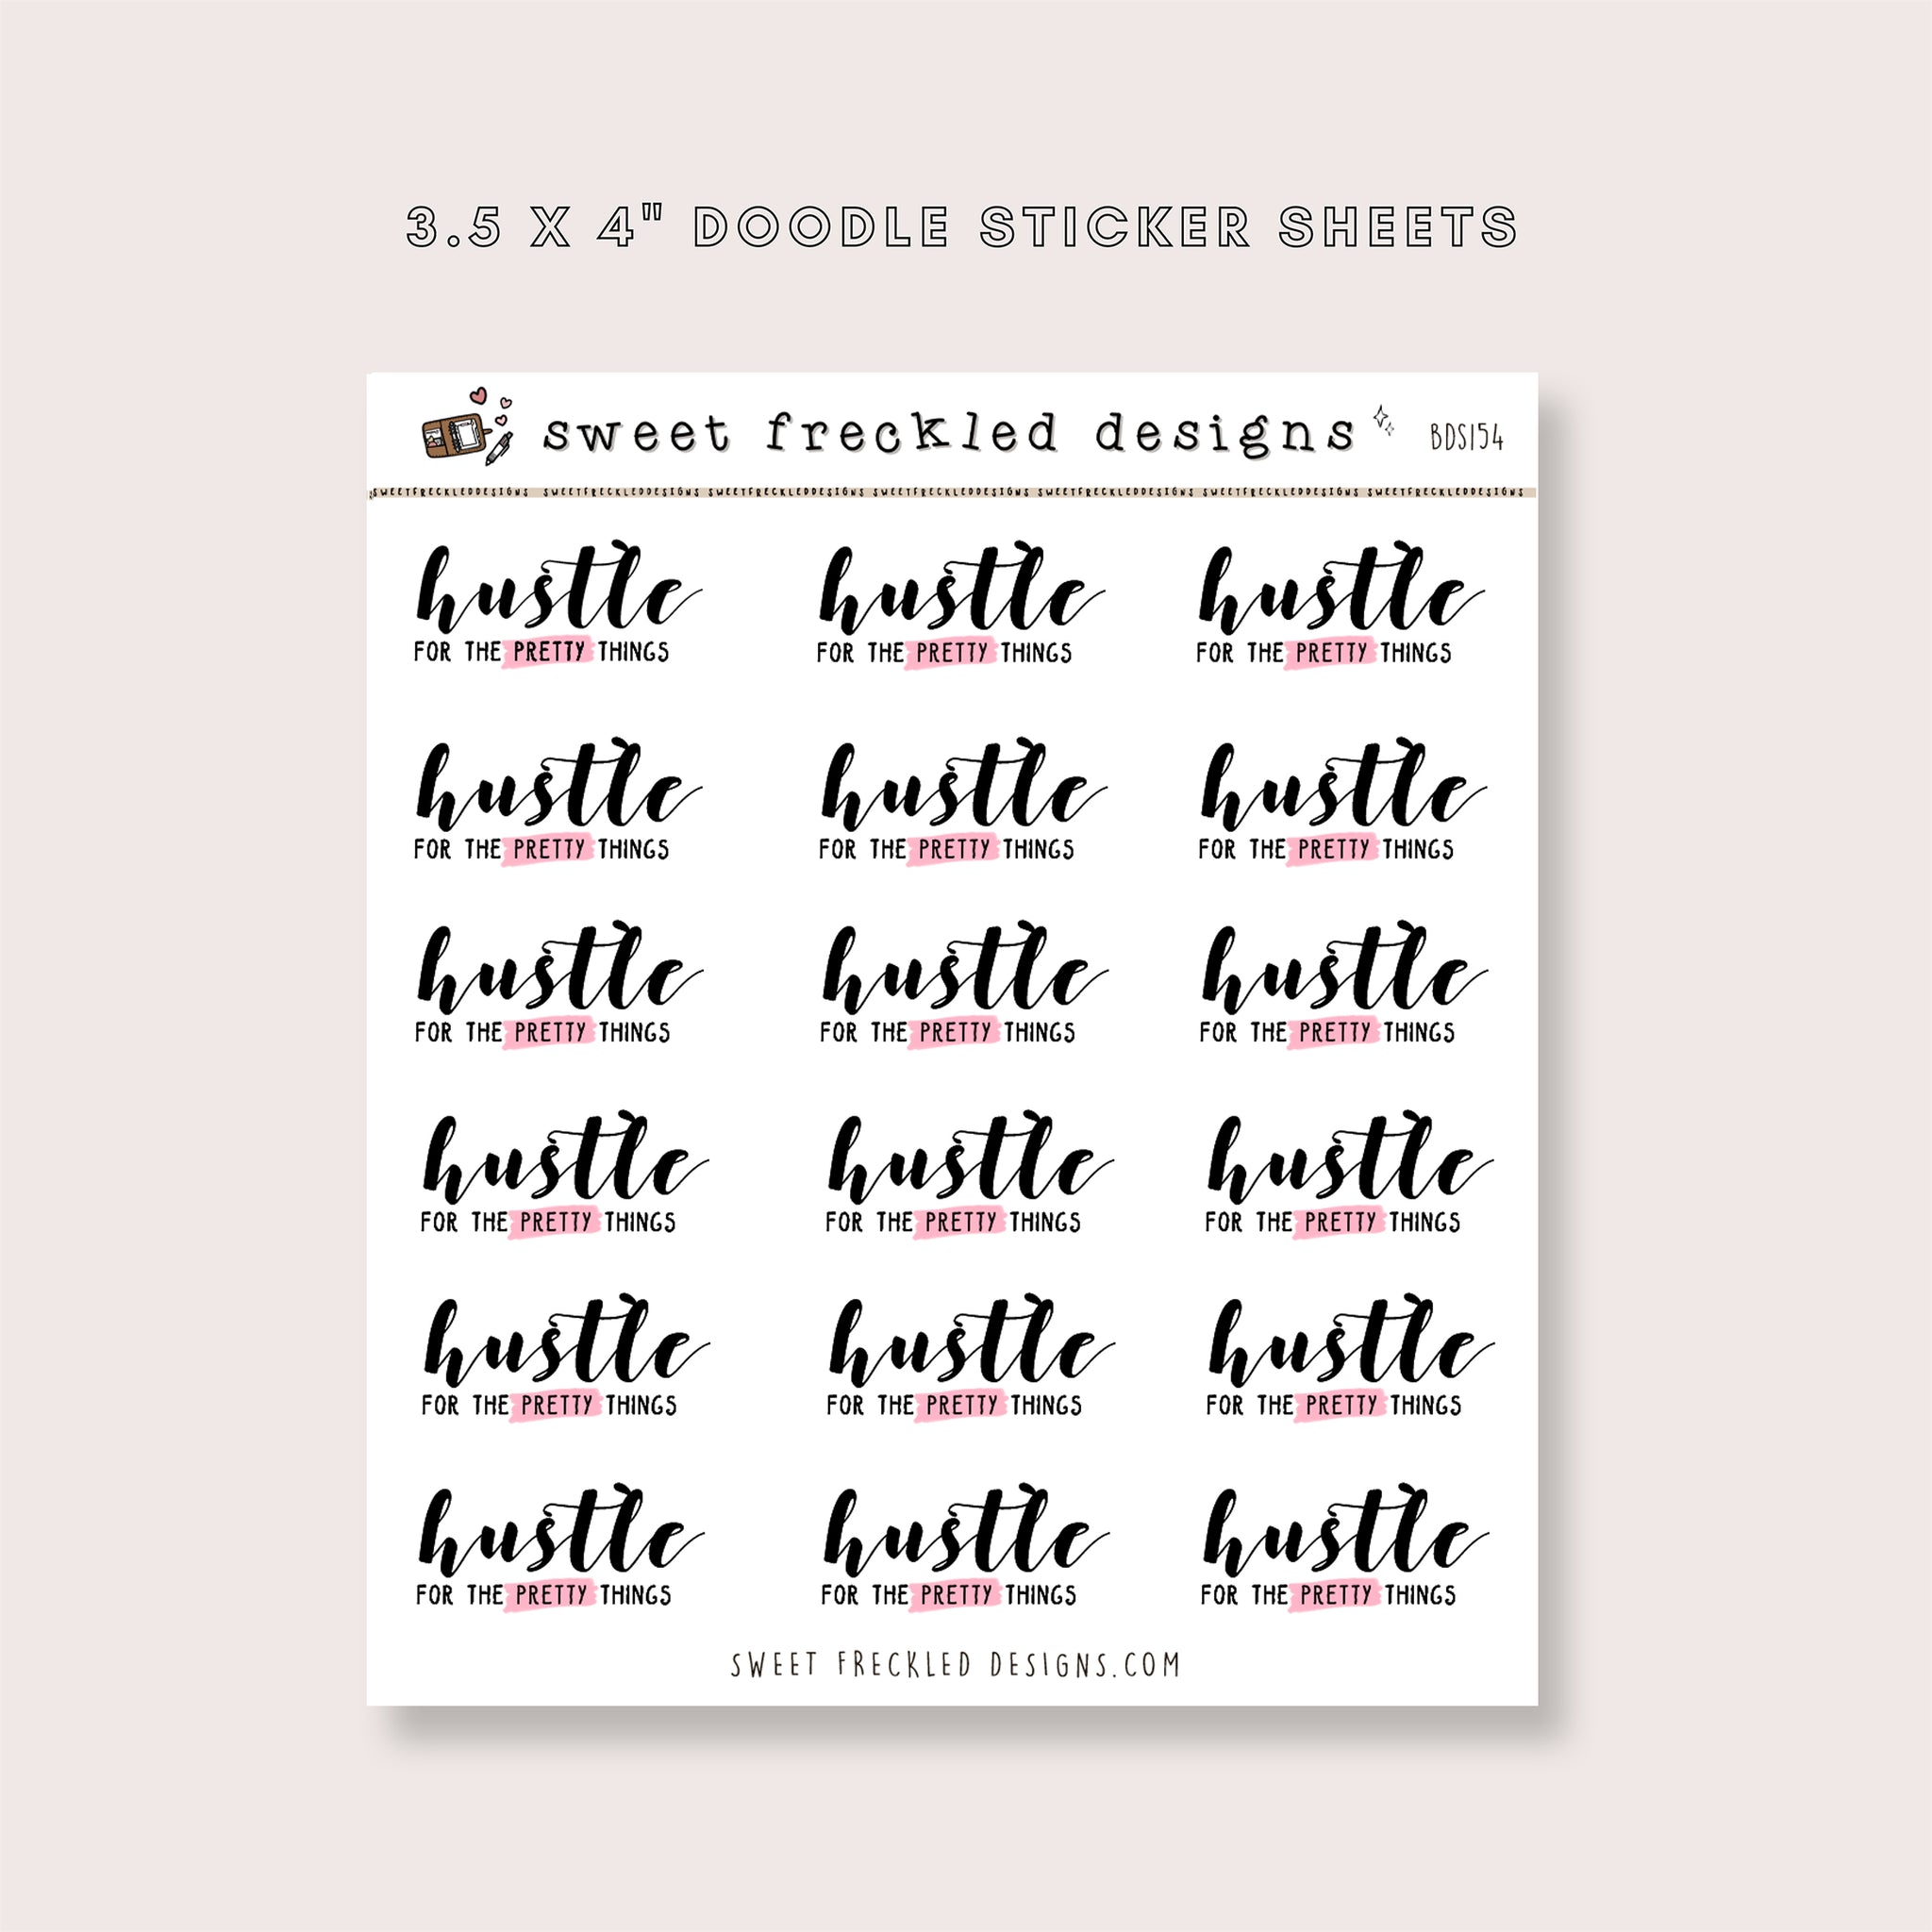 Hustle For the Pretty Things Stickers